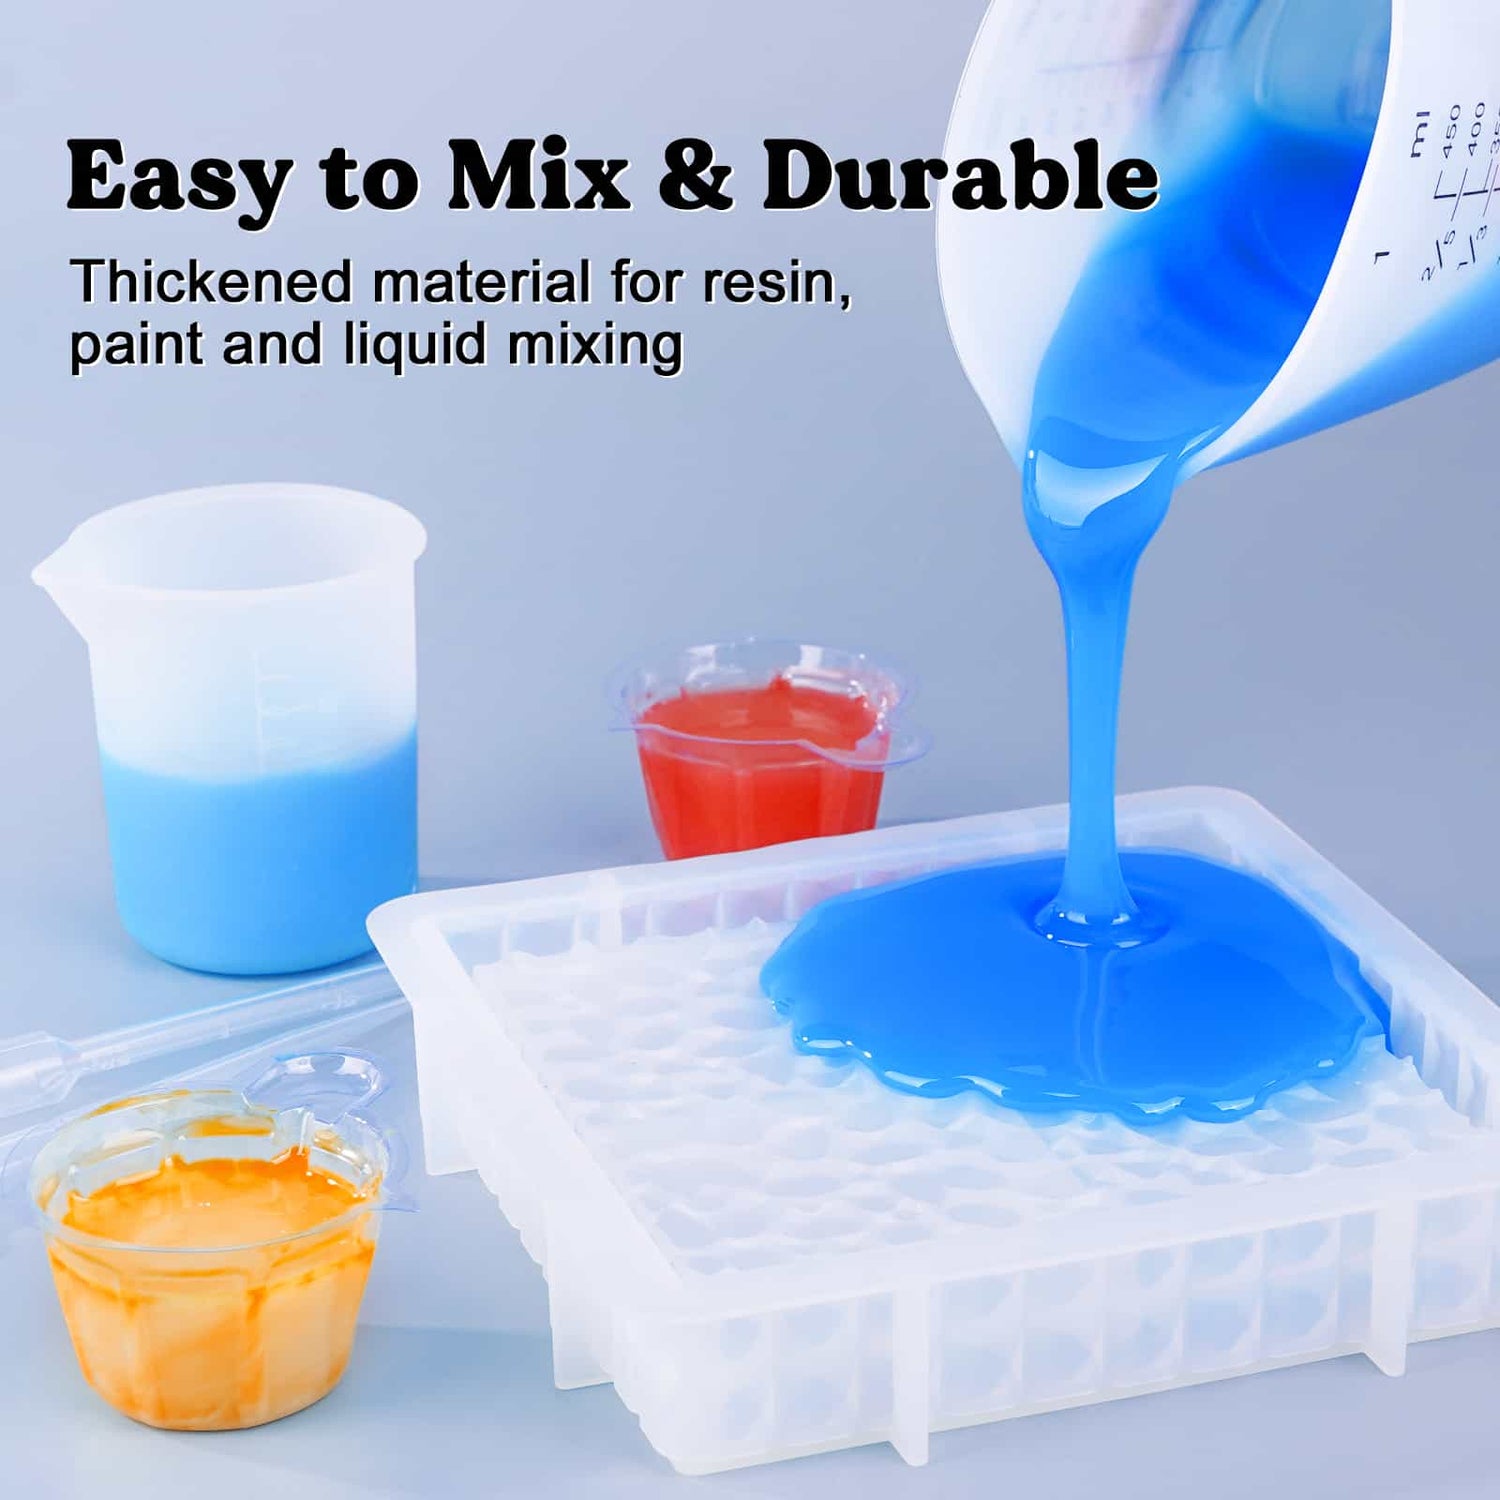 Silicone Measuring Cups - 450ml &amp; 100ml